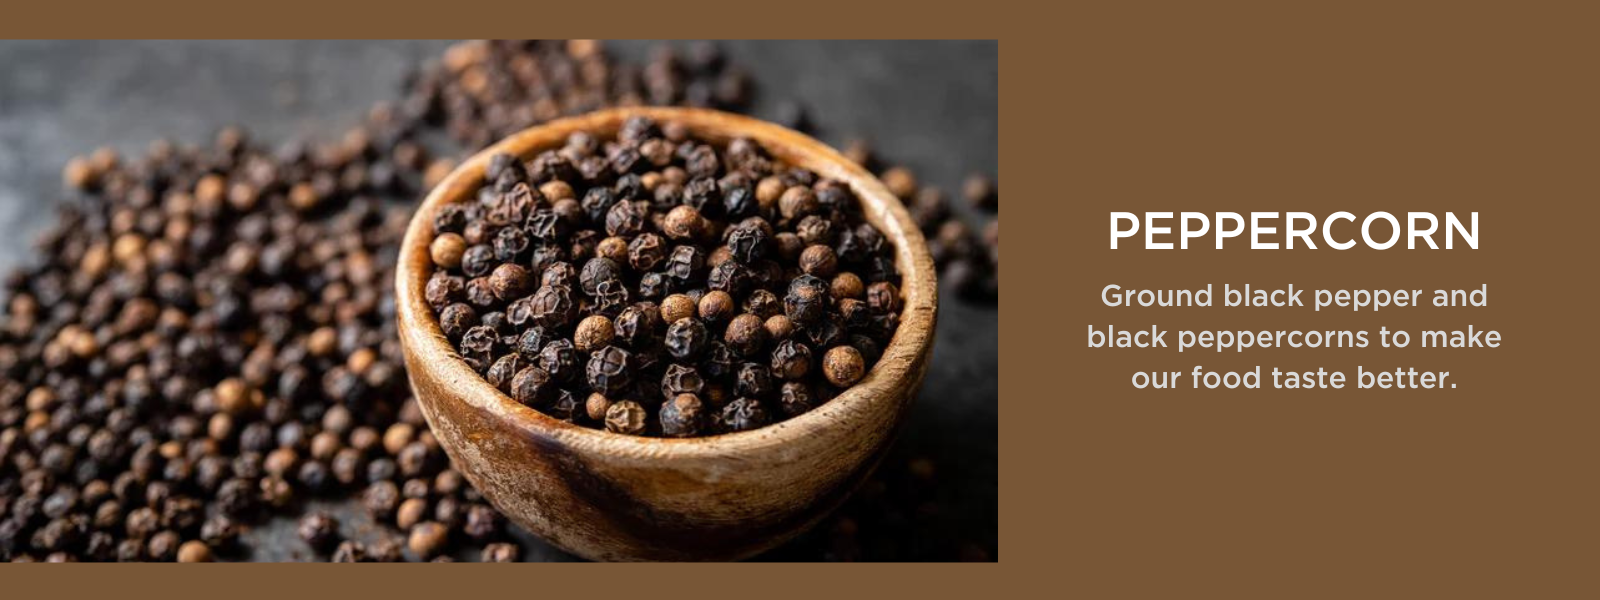 Peppercorn - Health Benefits, Uses and Important Facts